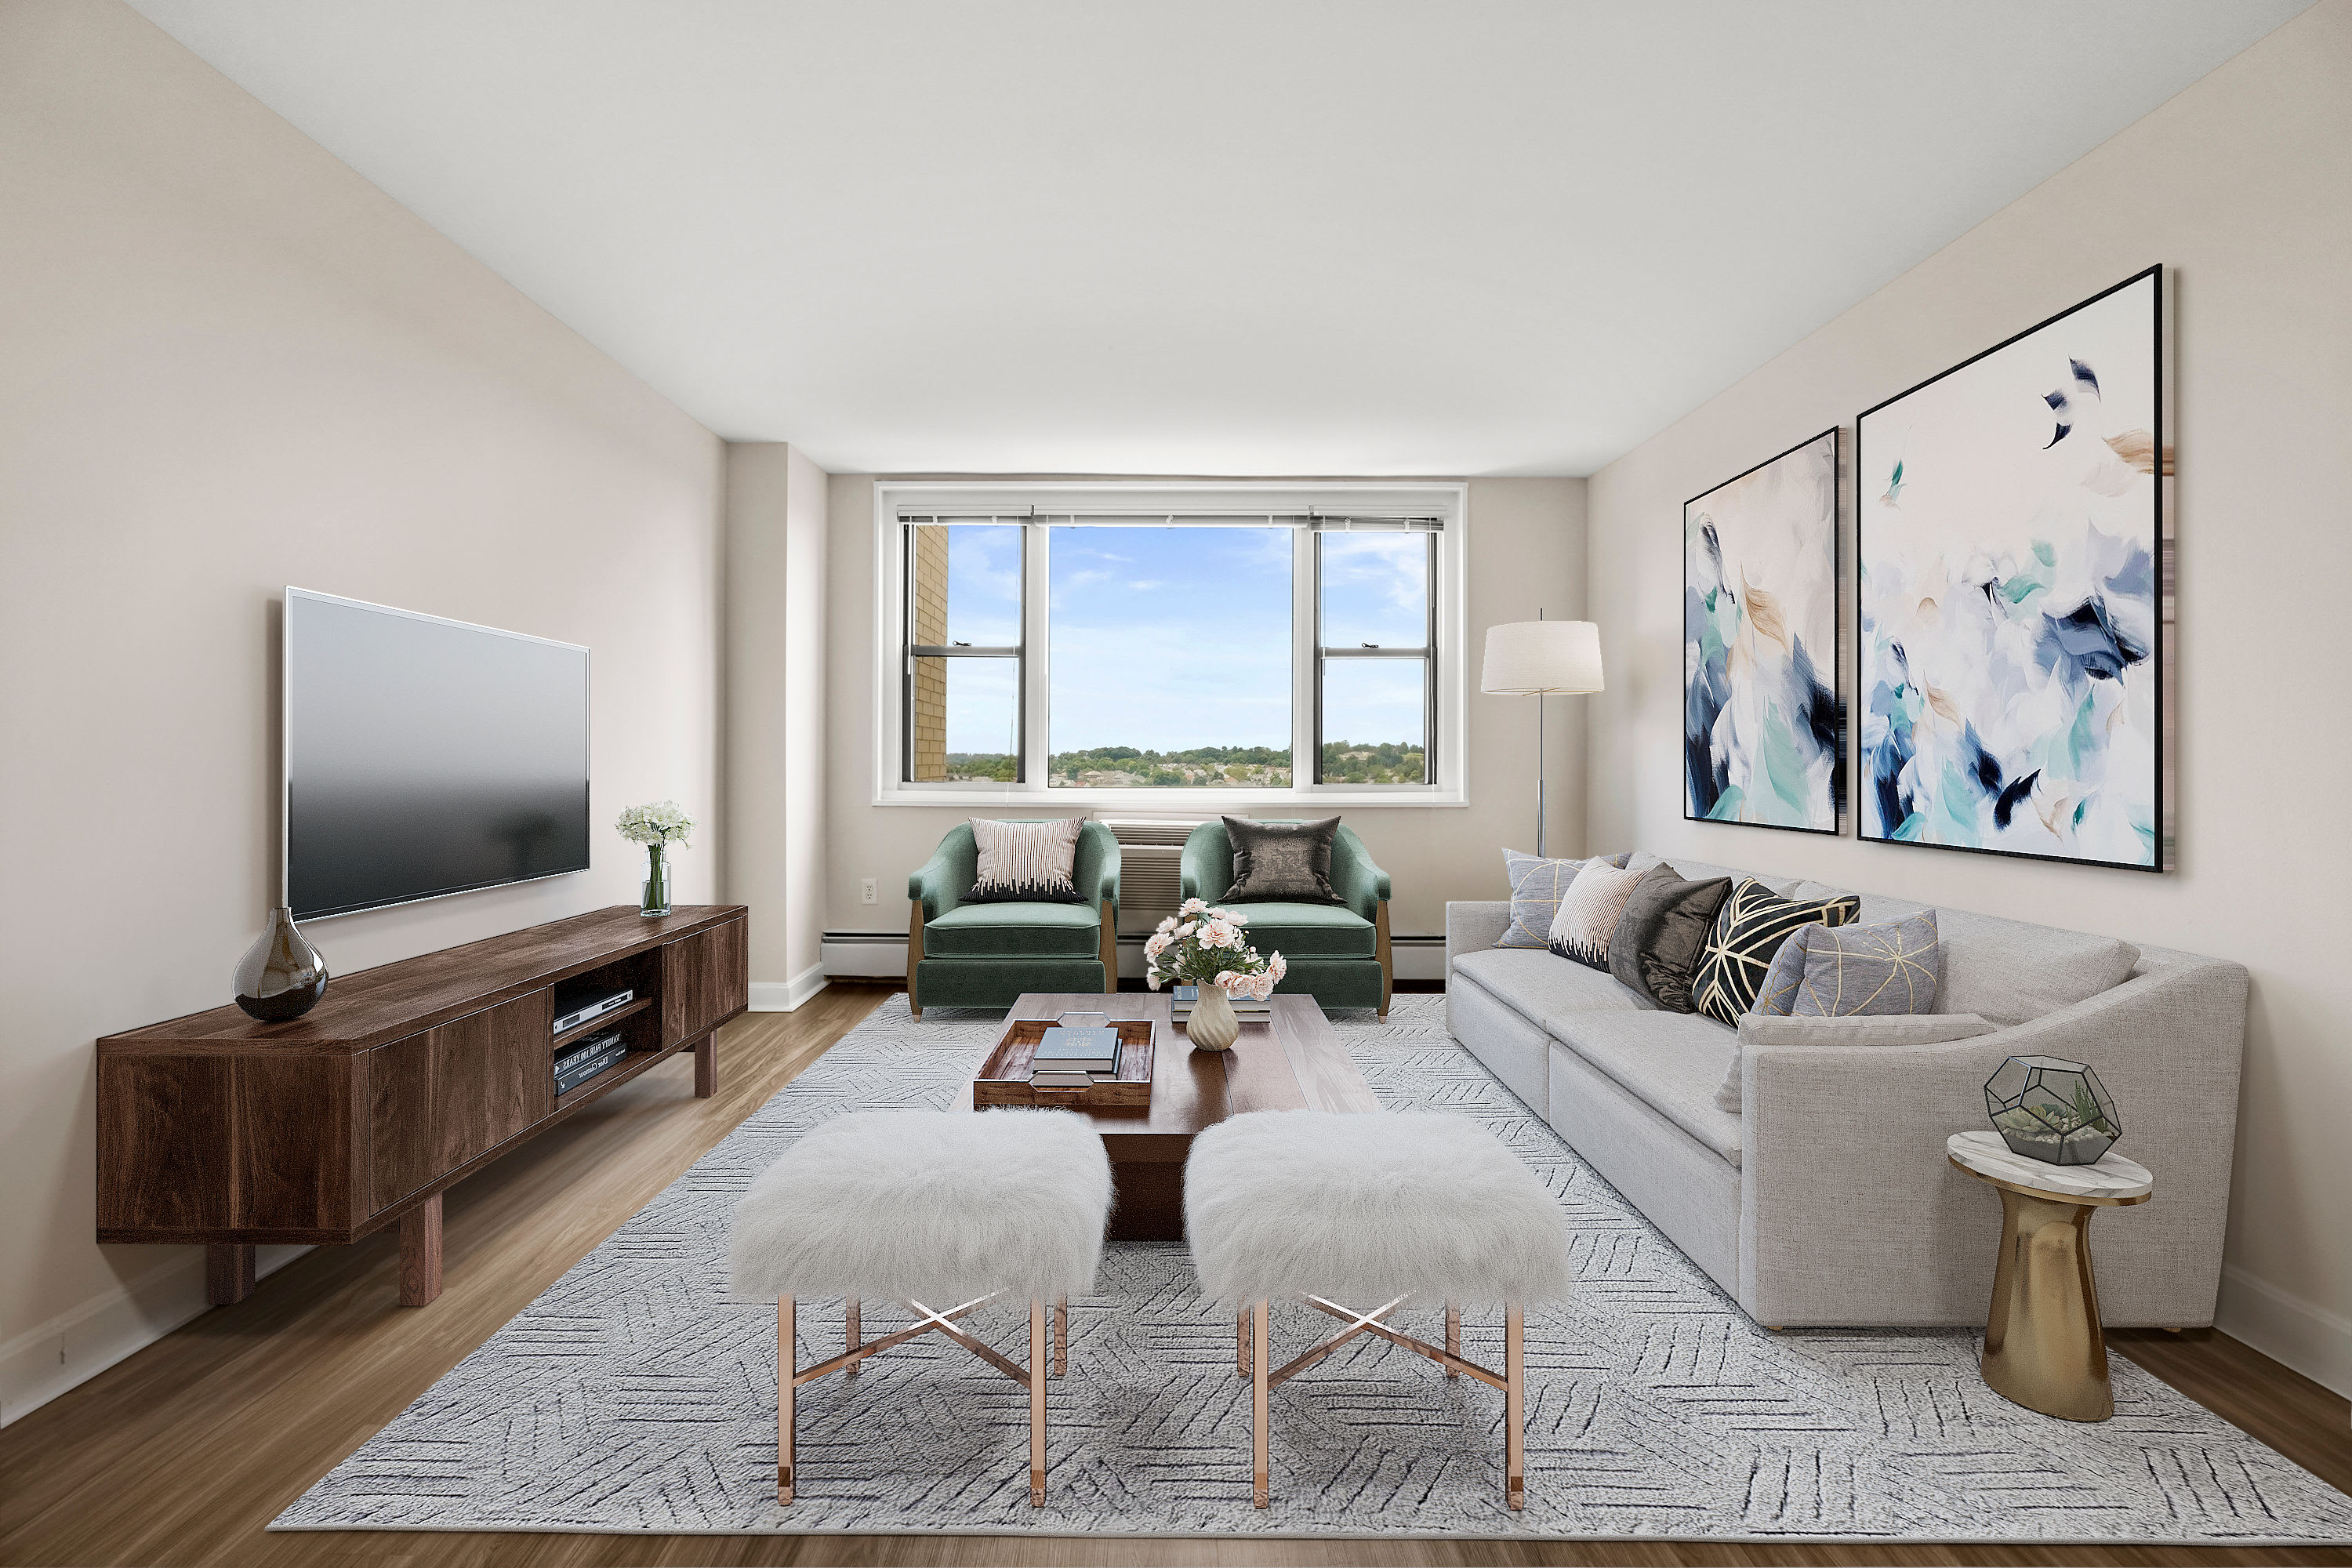 Parkside Place offers a Living Room in Cambridge, Massachusetts